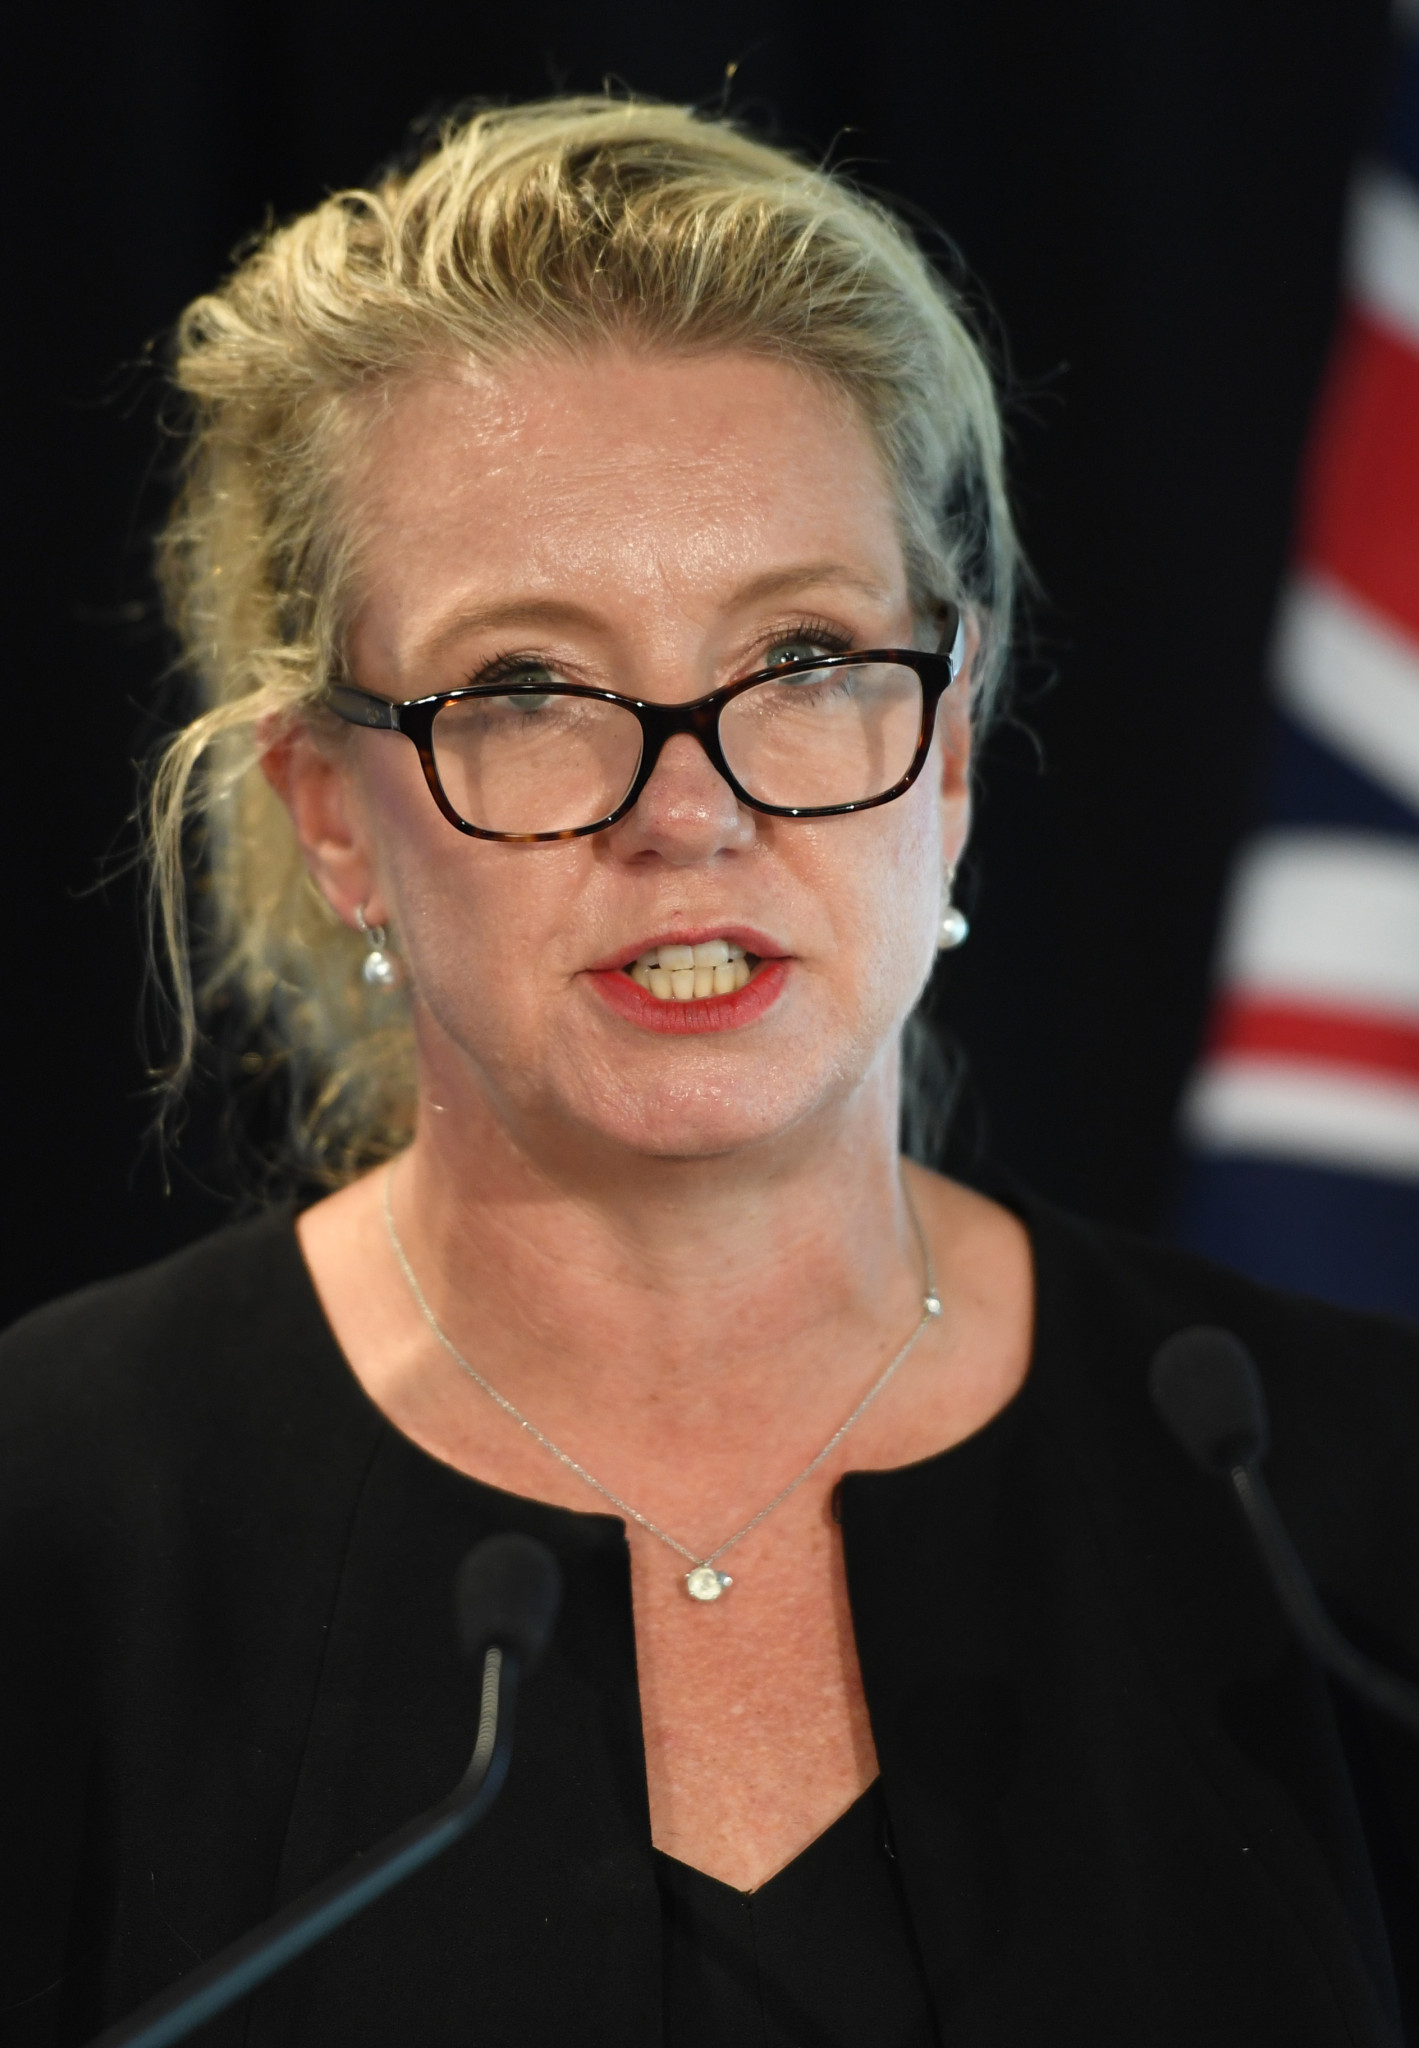 Sports Minister Bridget McKenzie has said that the Government is committed to making sure that sport in Australia continues to reflect the country's values of fairness, equality and reward for hard work ©Getty Images